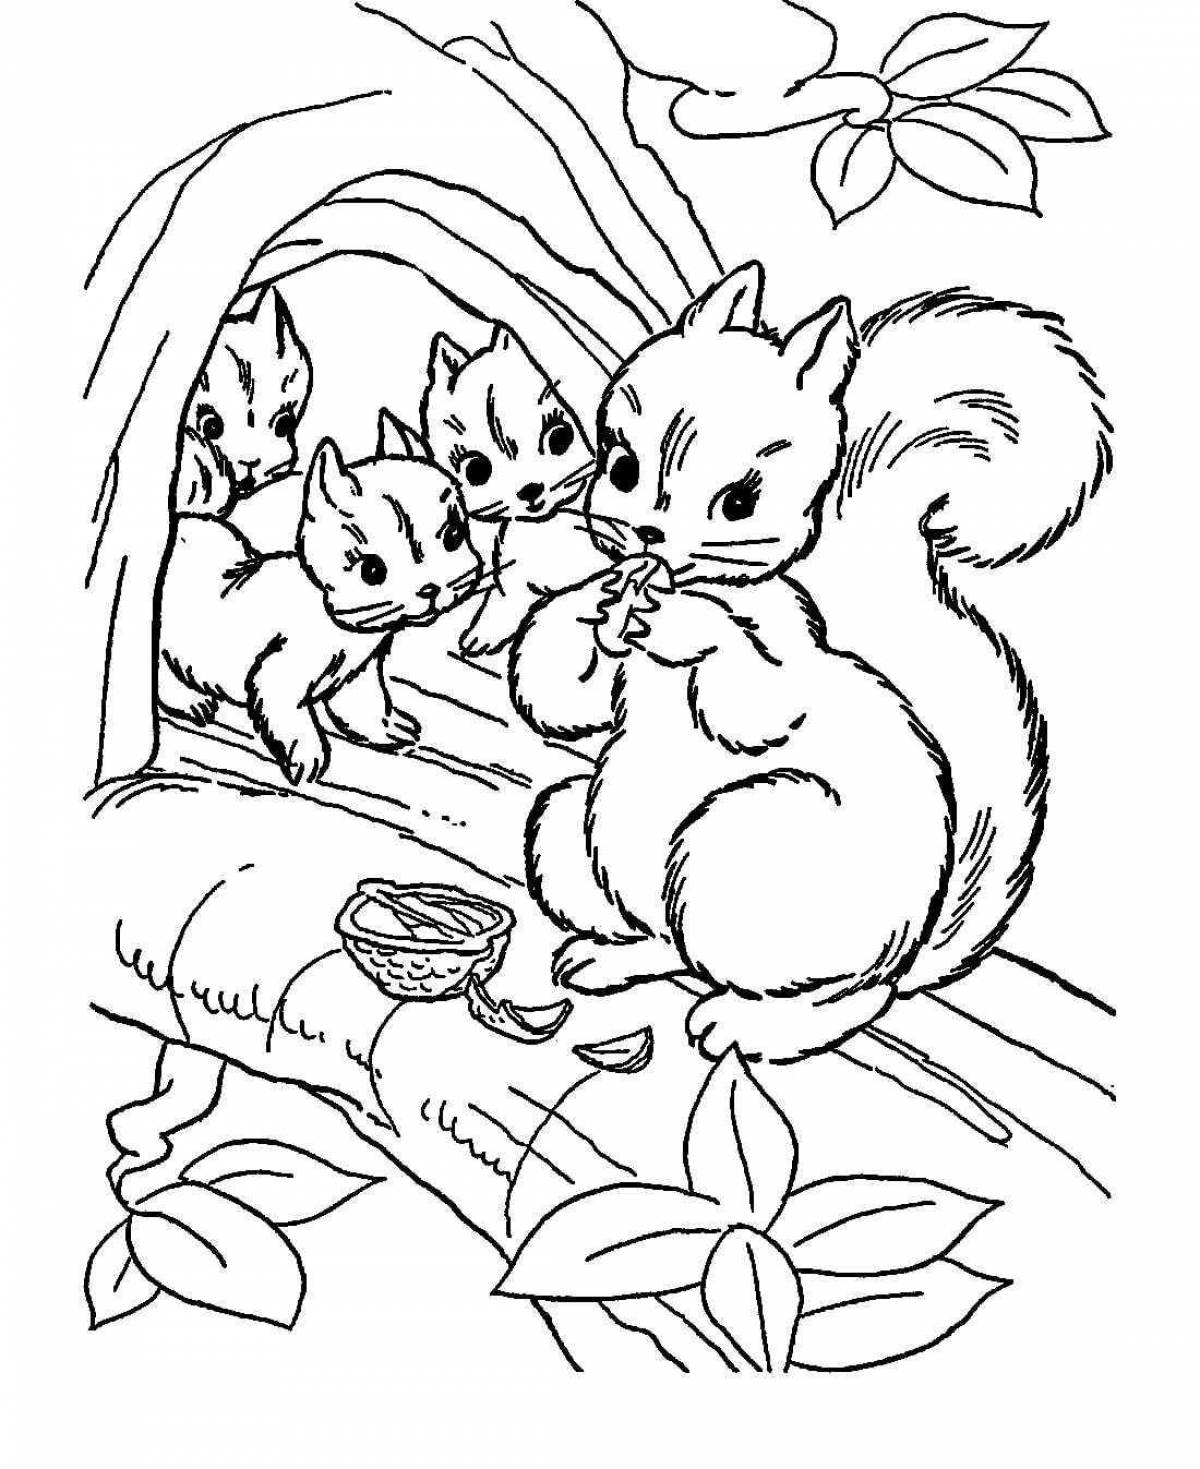 Outstanding forest animals coloring page for preschoolers